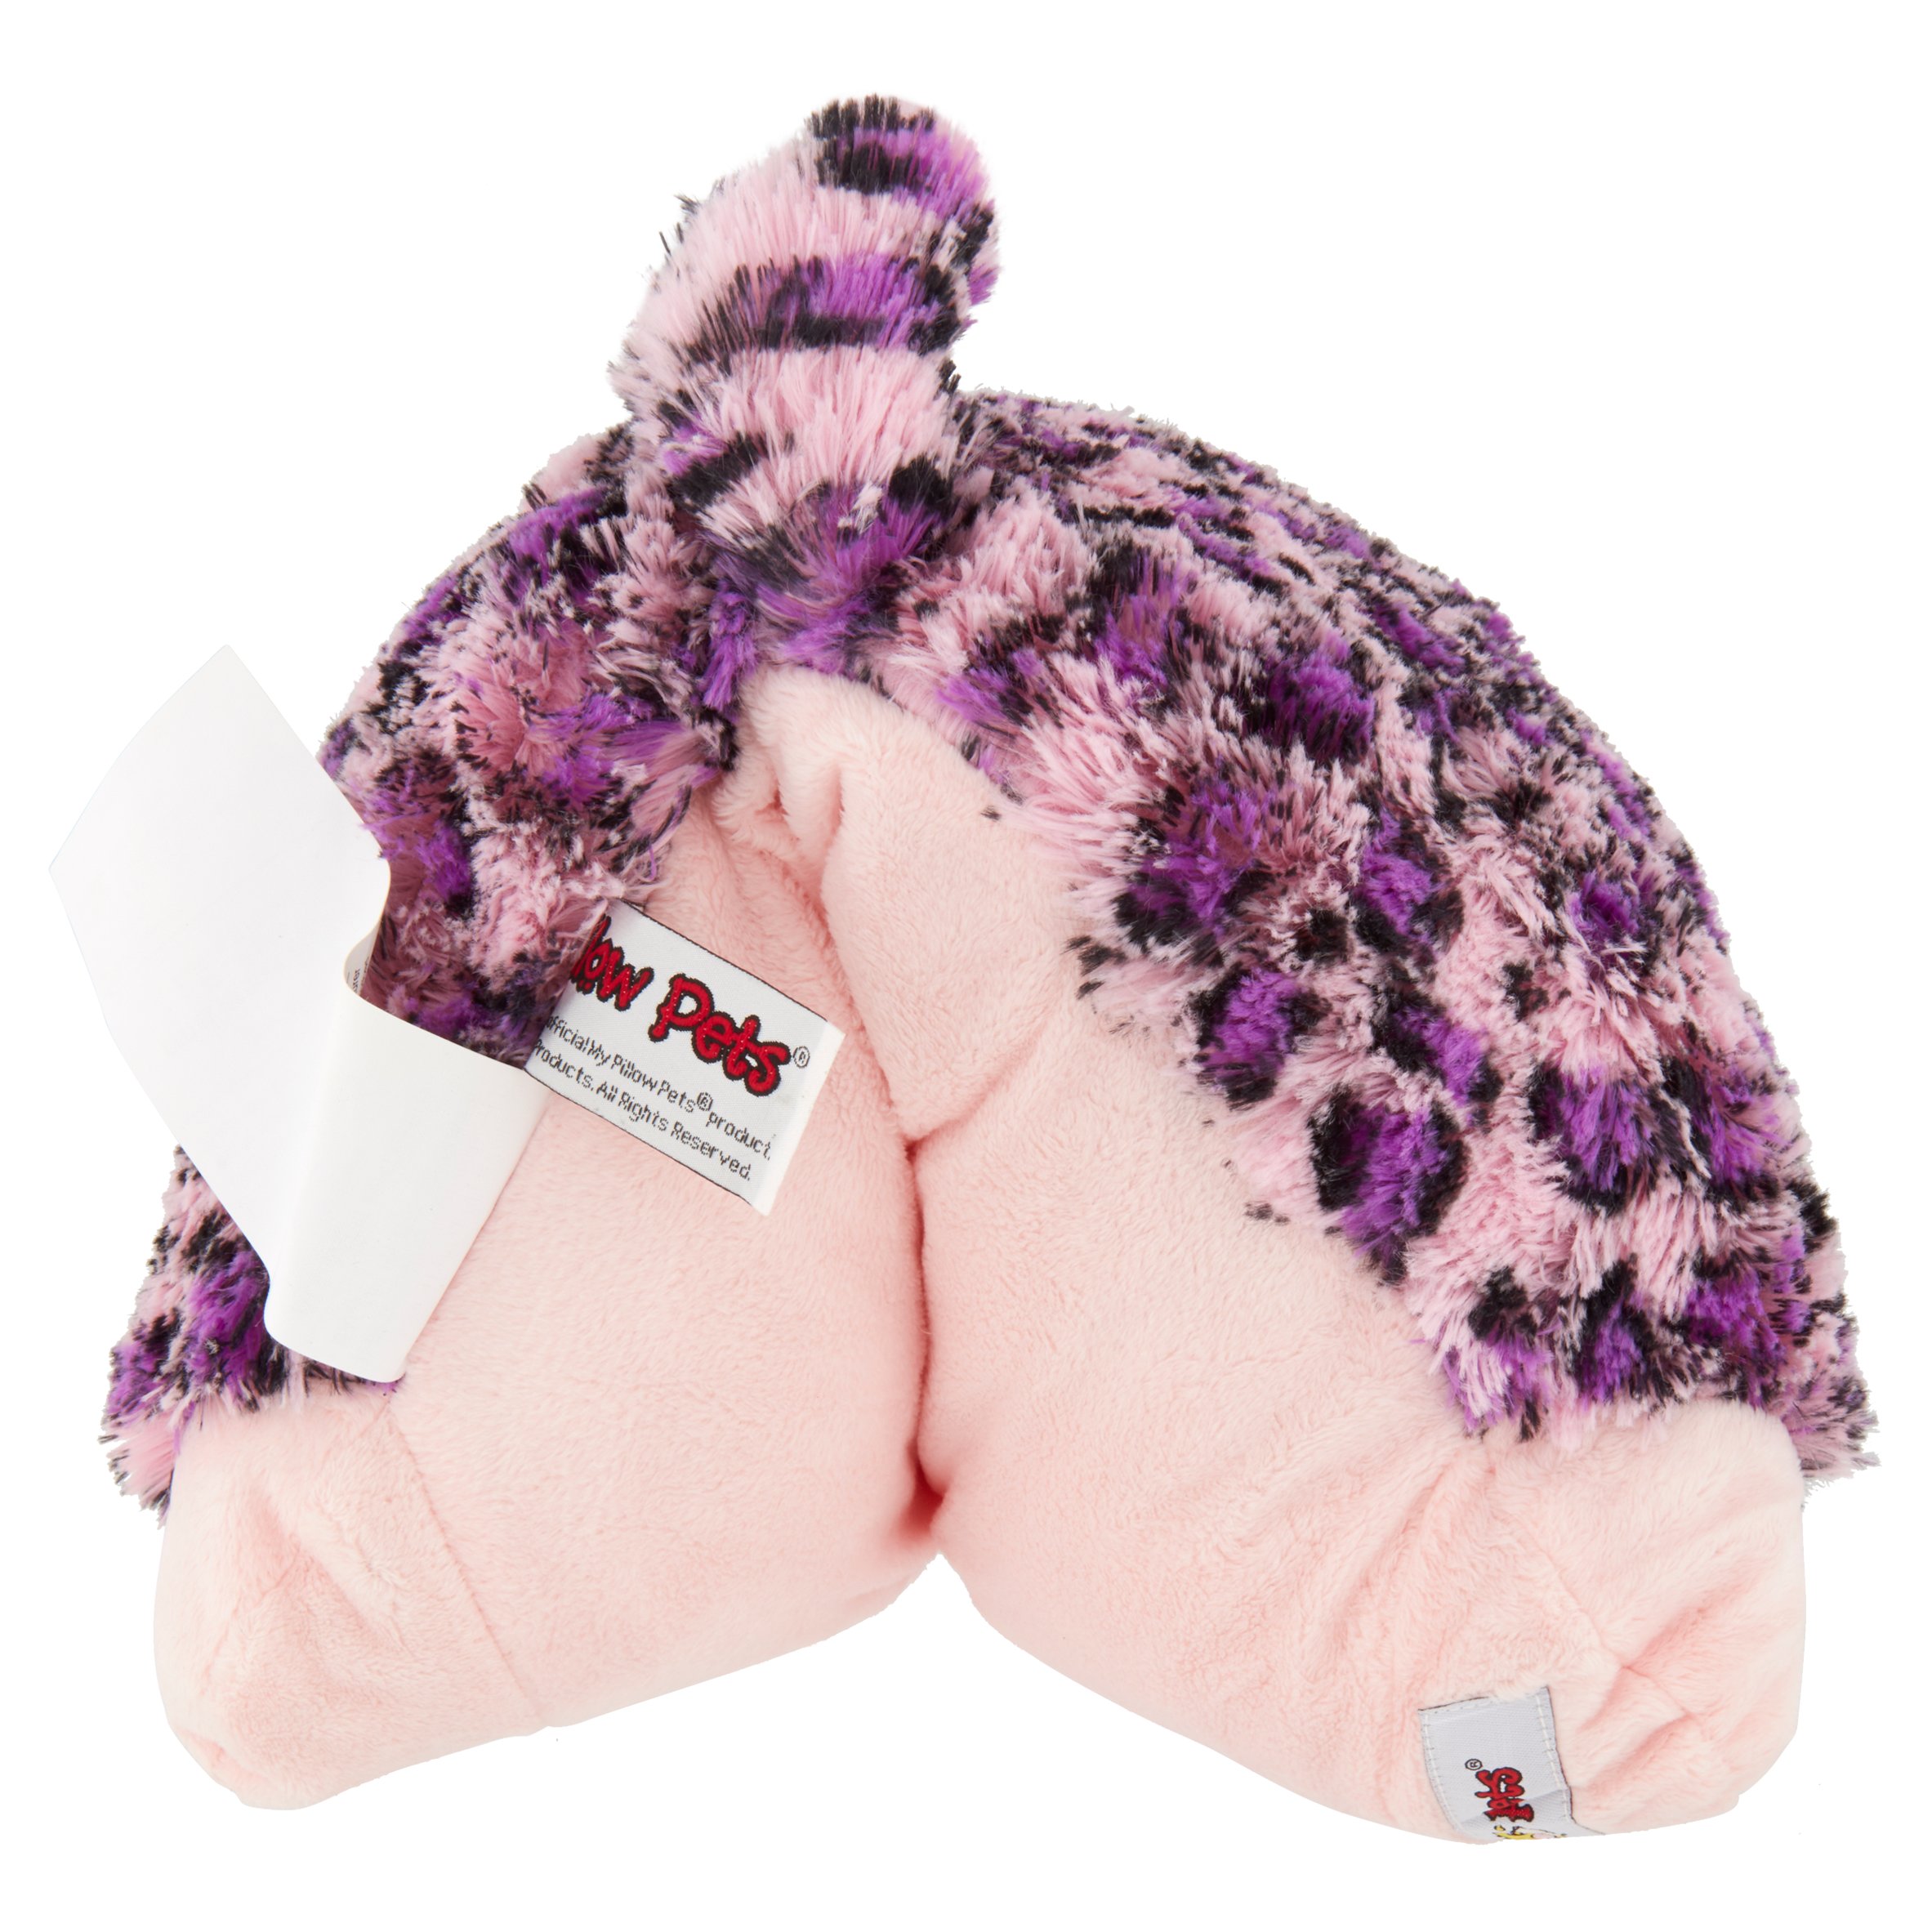 As Seen on TV Pillow Pet, Pink Leopard - image 4 of 5